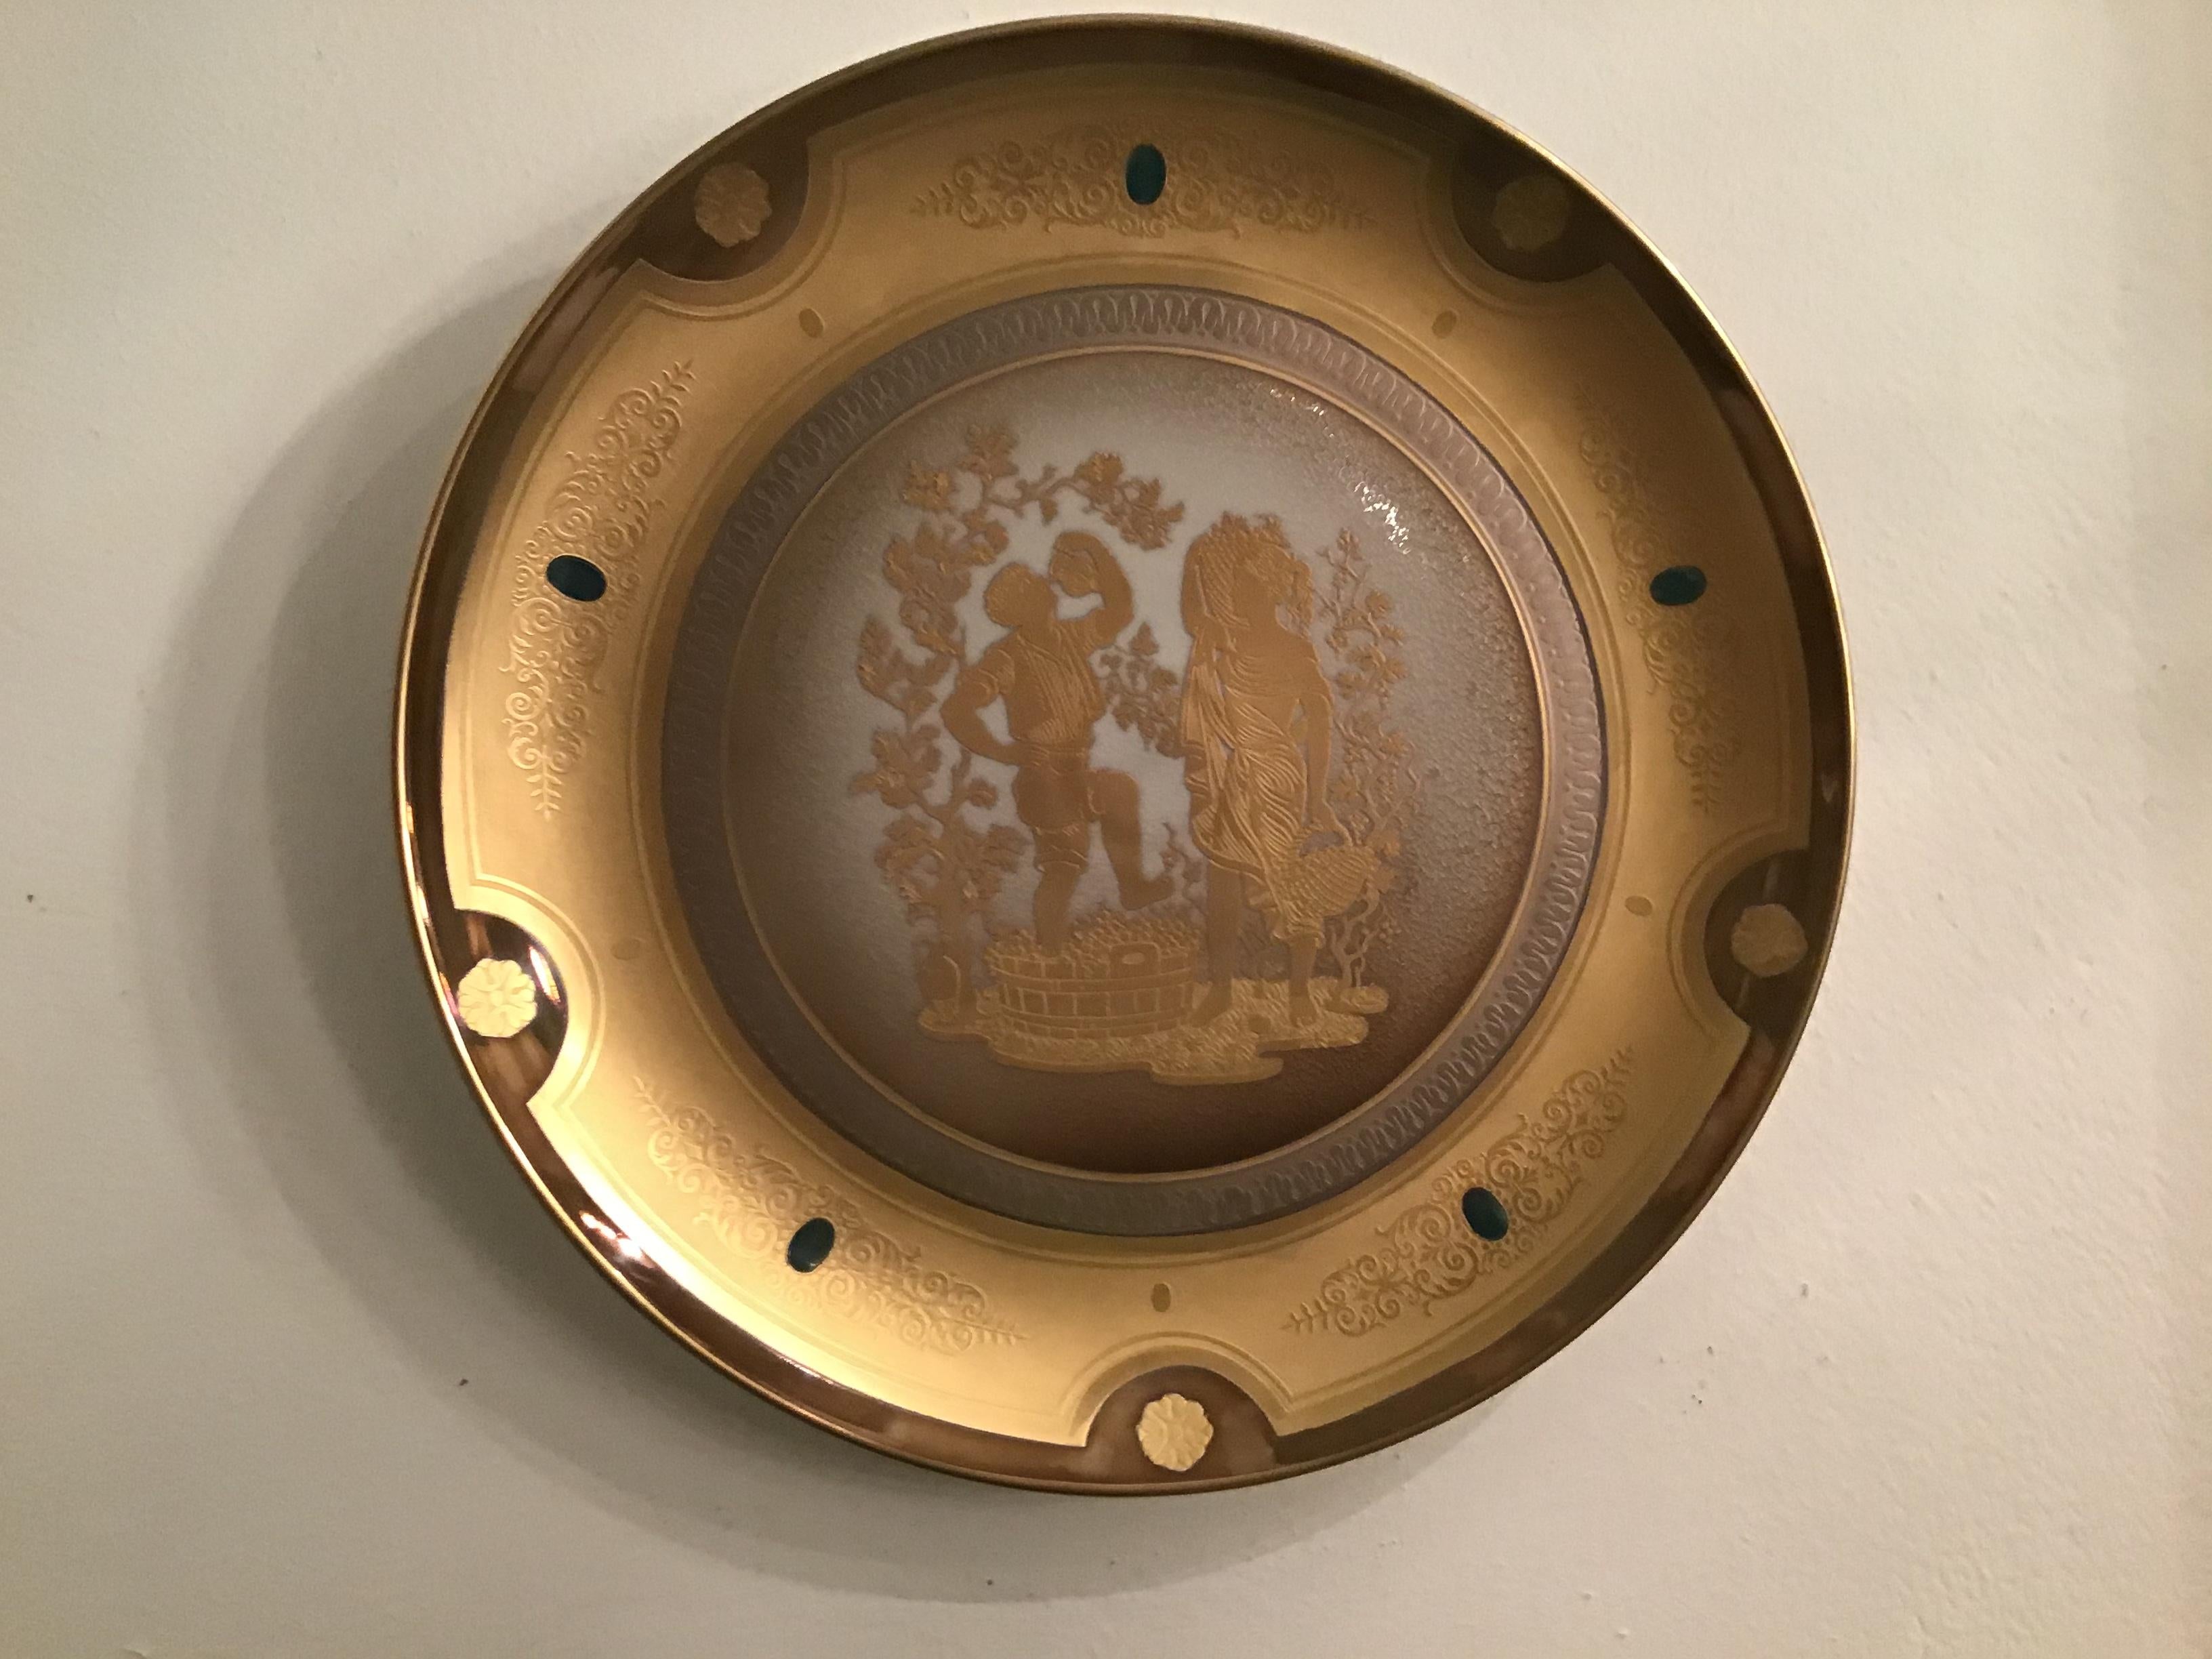 Morbelli Porcelain Wall Plate Gold “ Autunno”, 1960, Italy For Sale 9